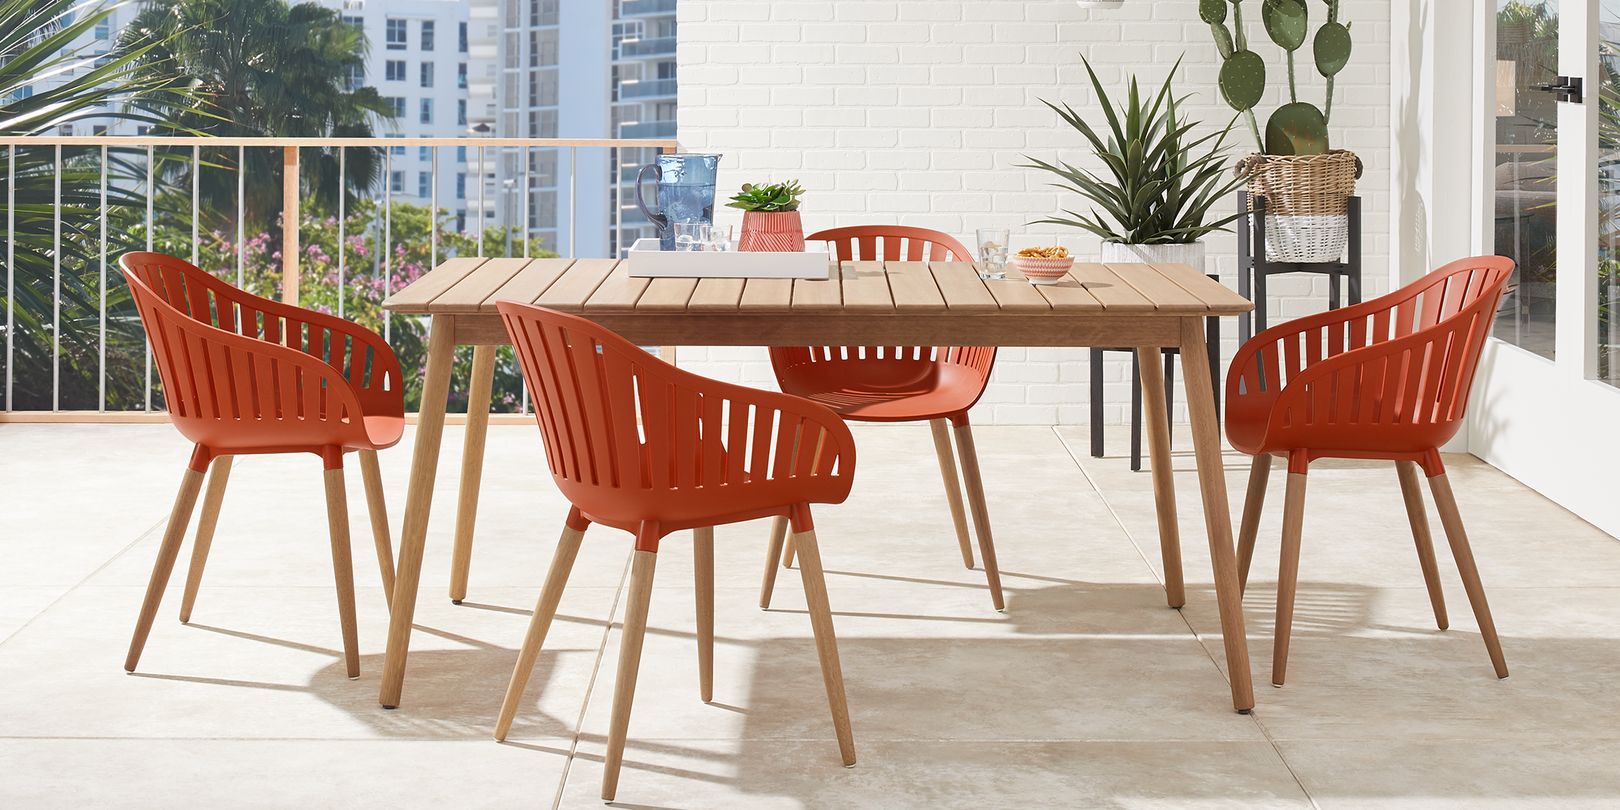 Photo of wooden mid-century modern patio dining set with orange chairs